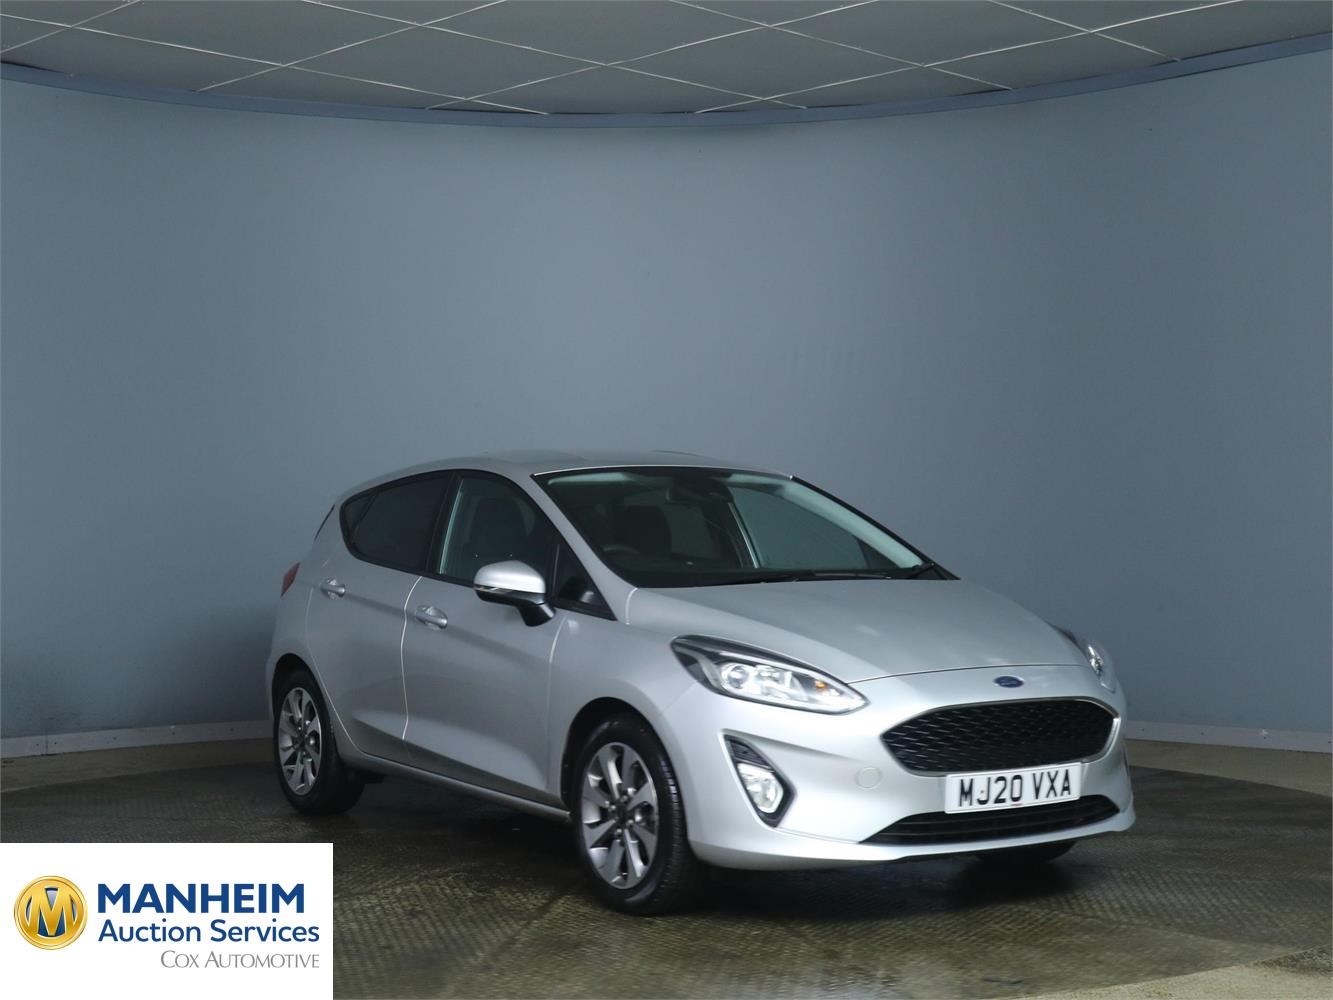 FORD
FIESTA
1.0 EcoBoost 95 Trend 5dr